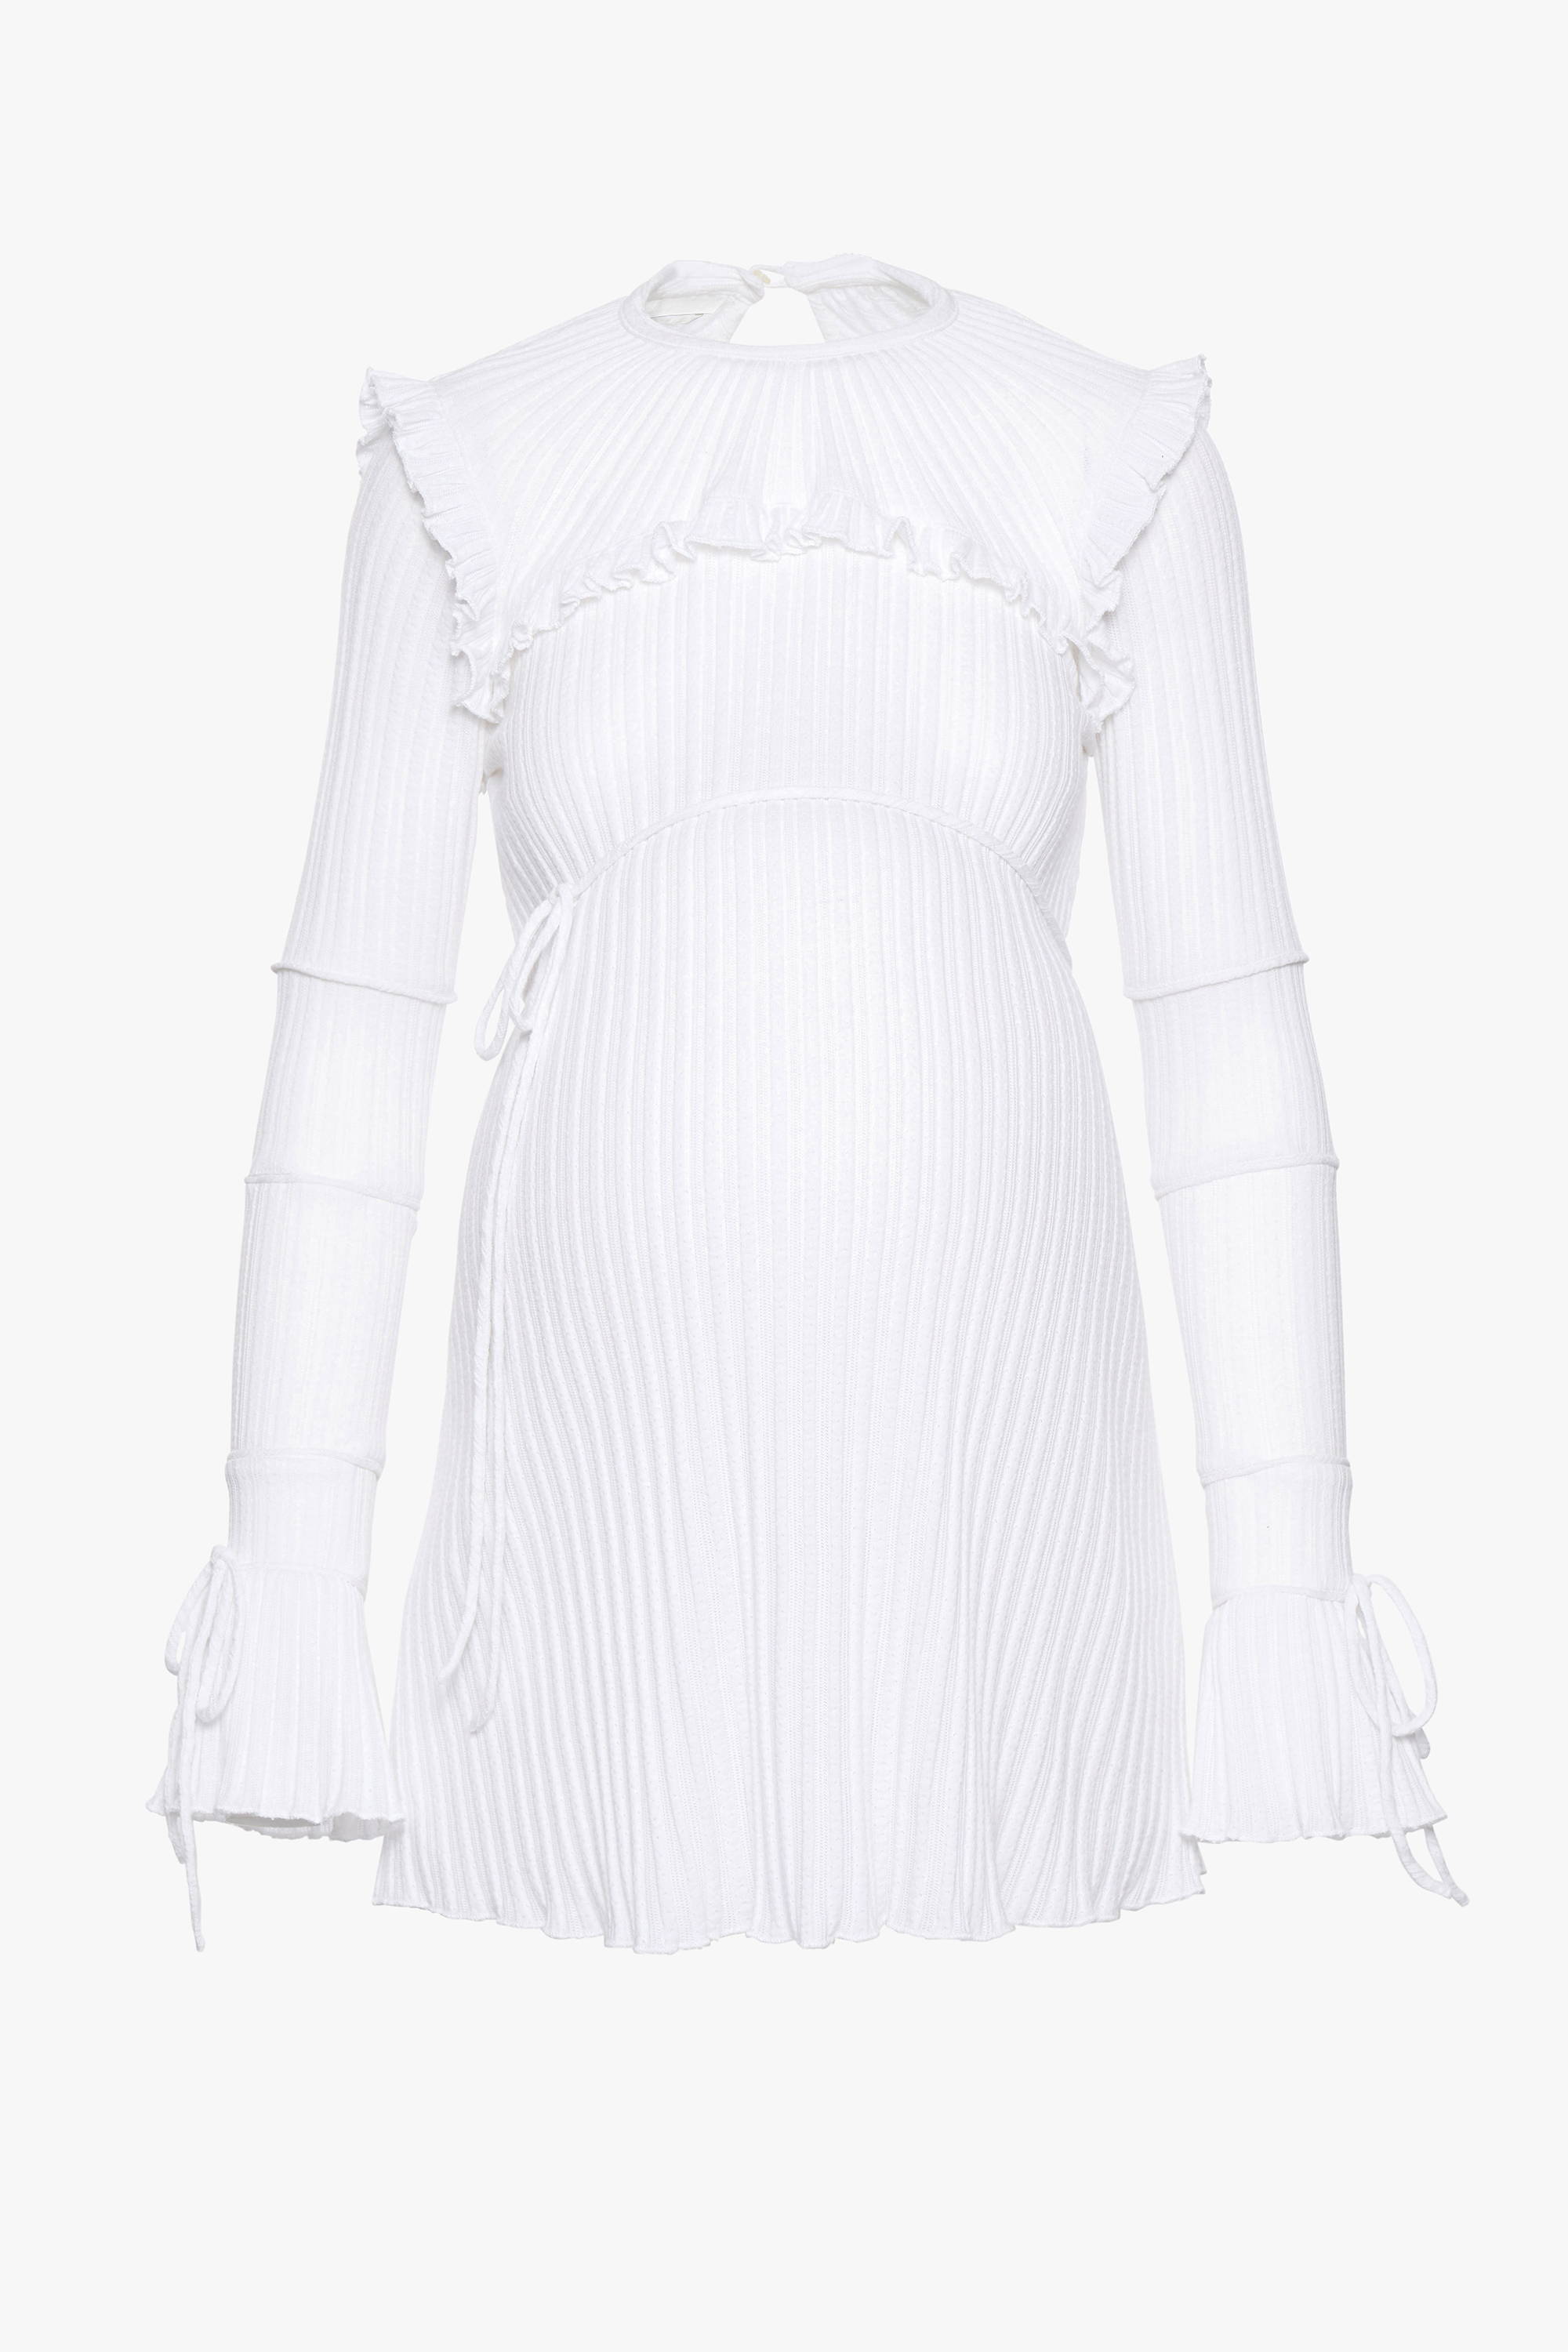 The maternity friendly Wonderland dress in white cable knit